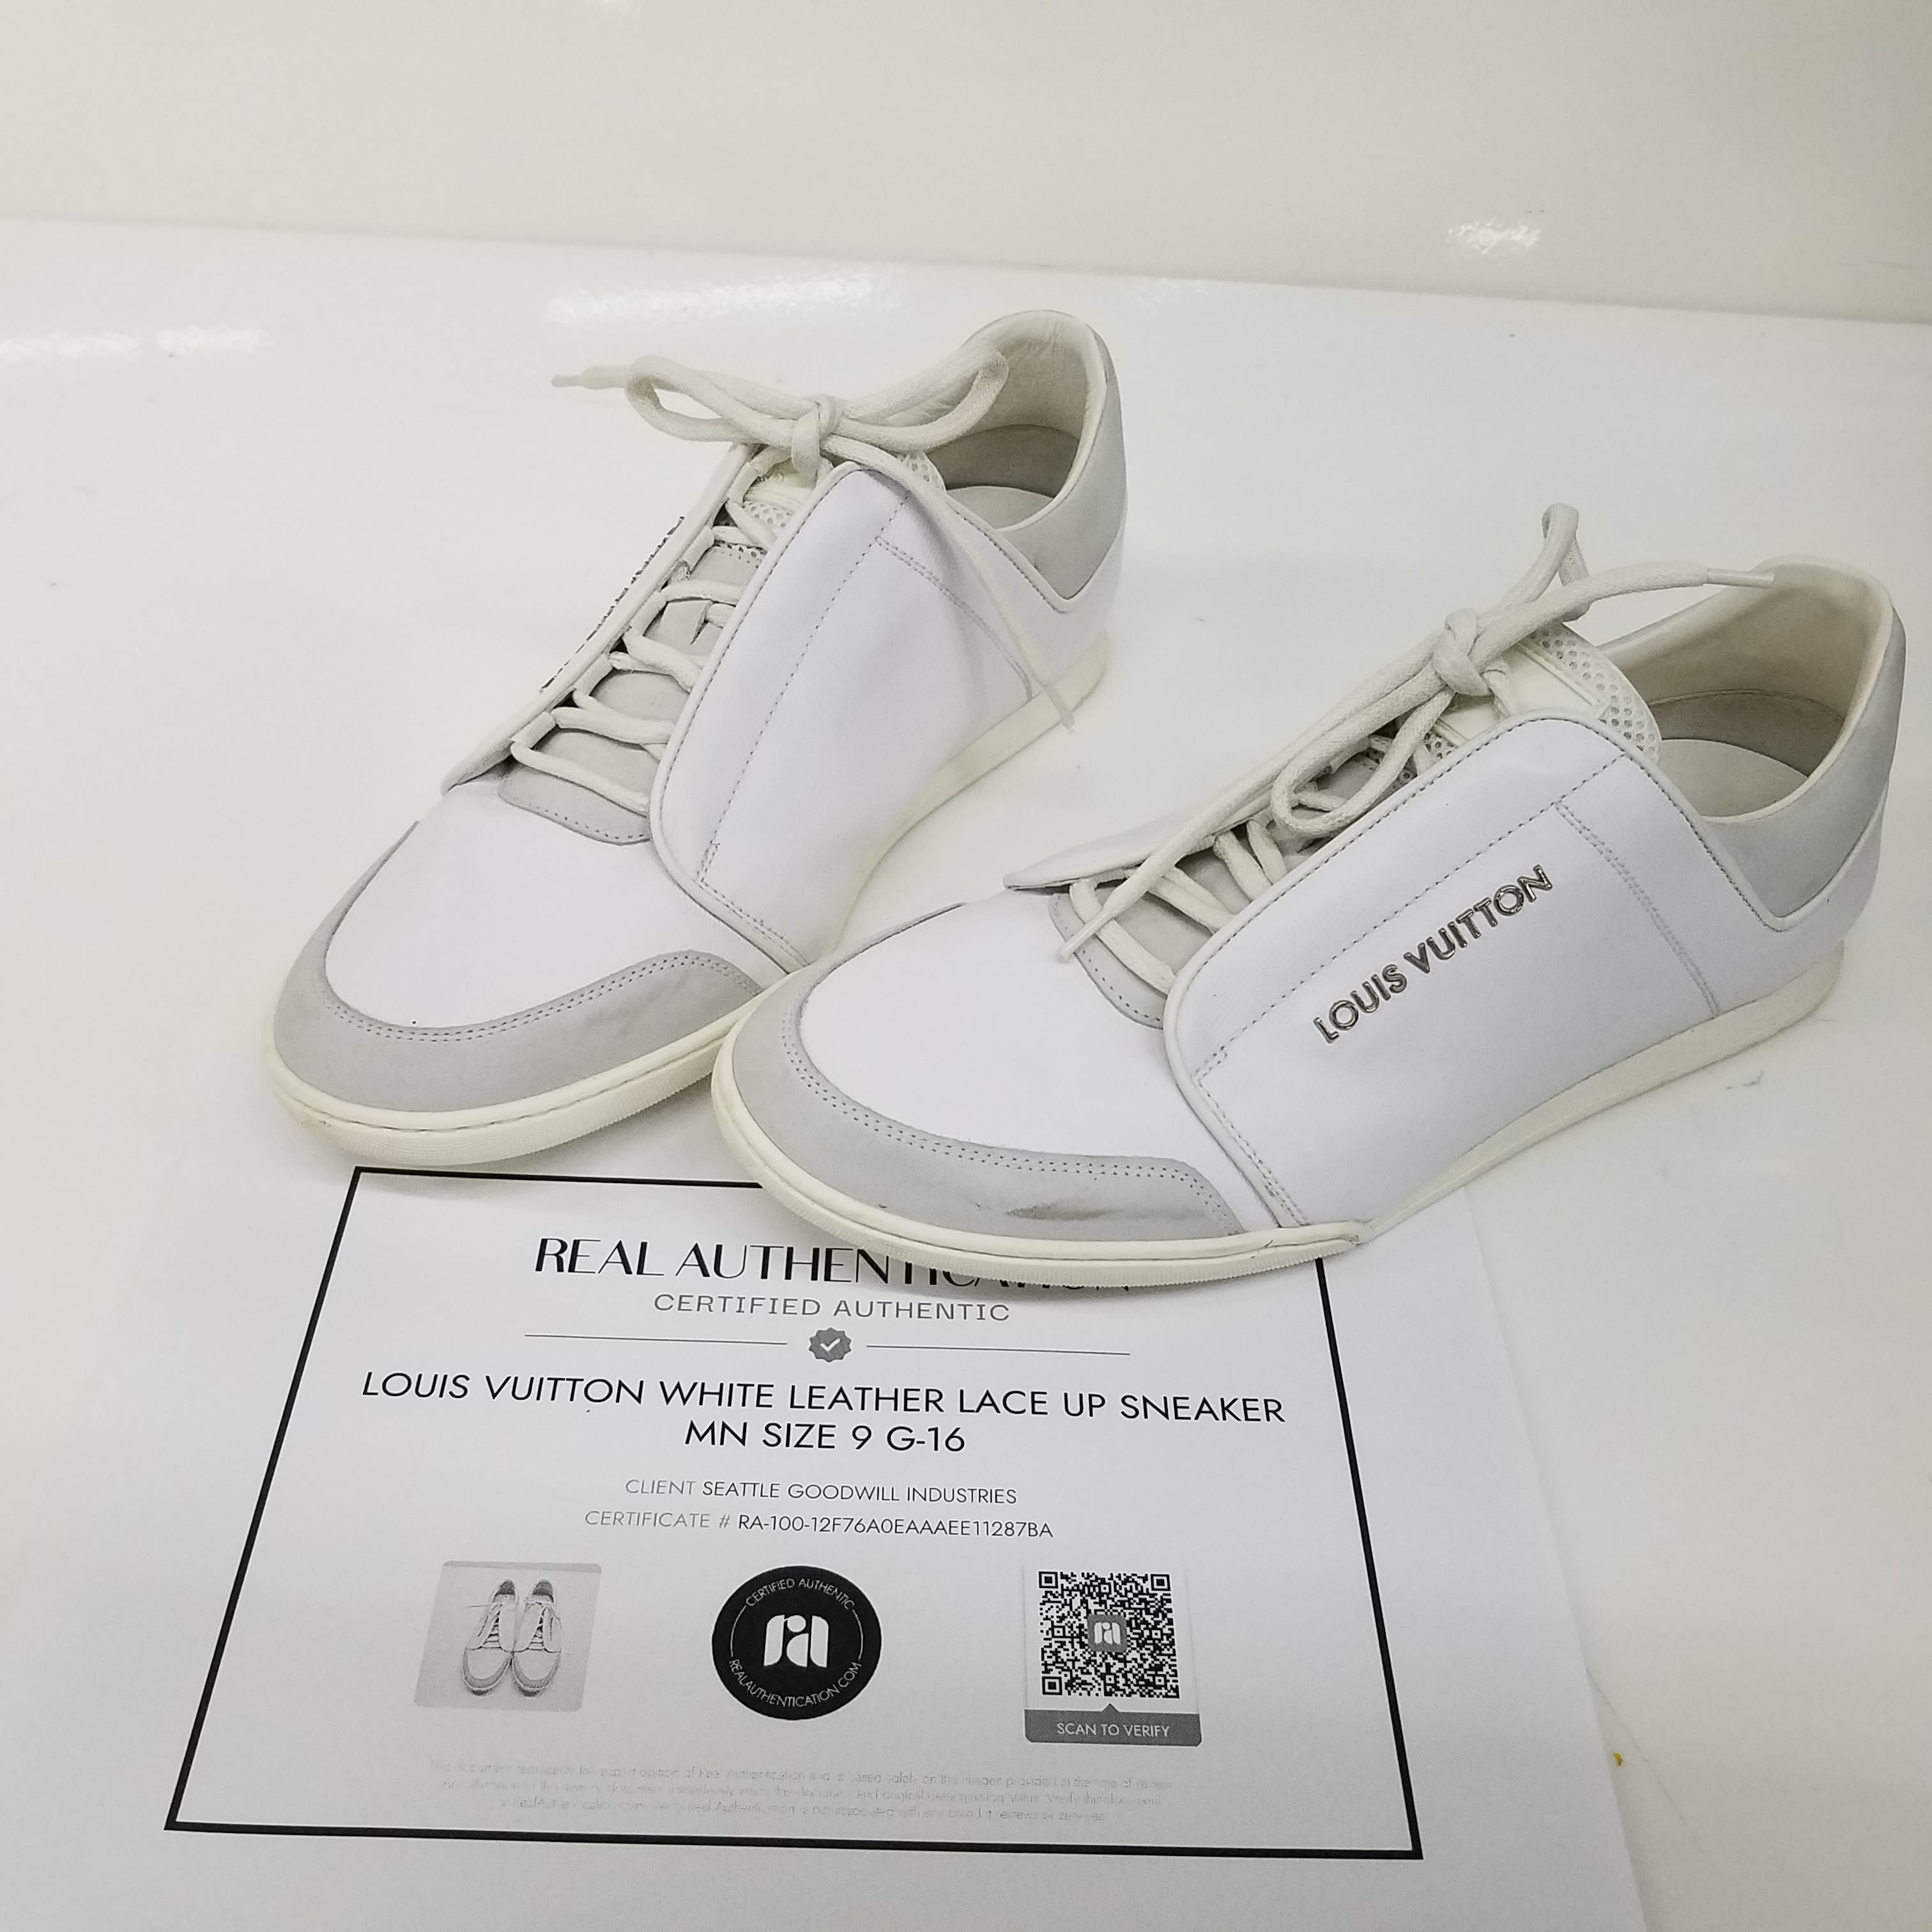 Louis Vuitton, Shoes, Are These Authentic Or Fake